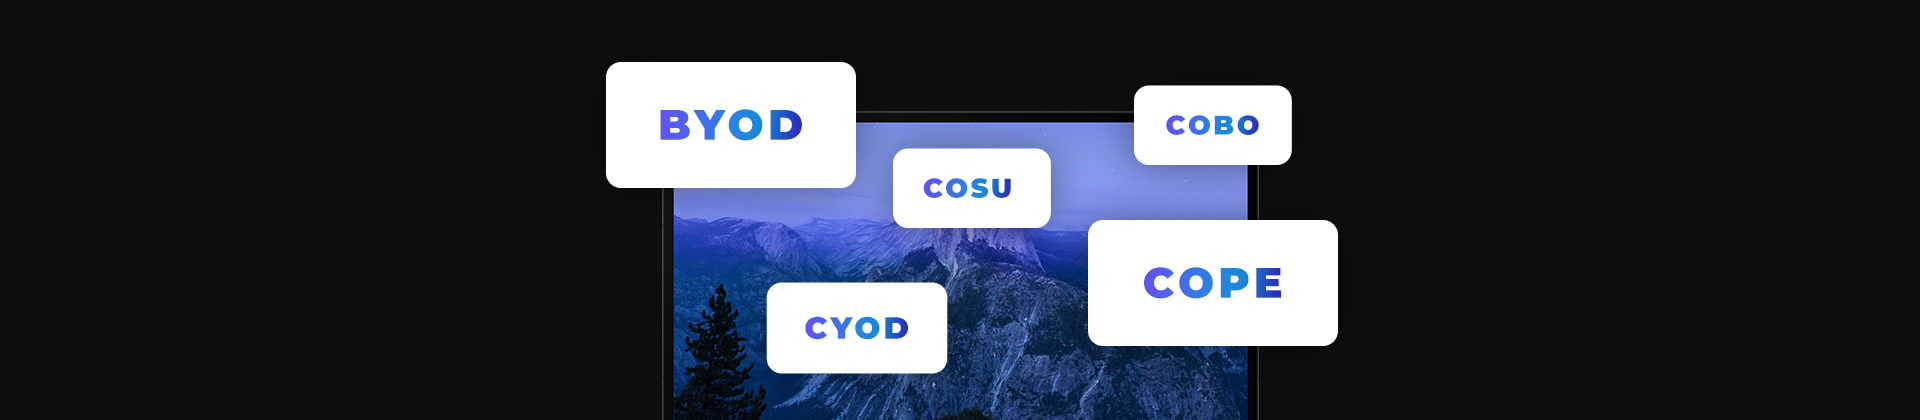 banner with laptop screen and tiles, BYOD CYOD COSU COBO COPE mobility management policies